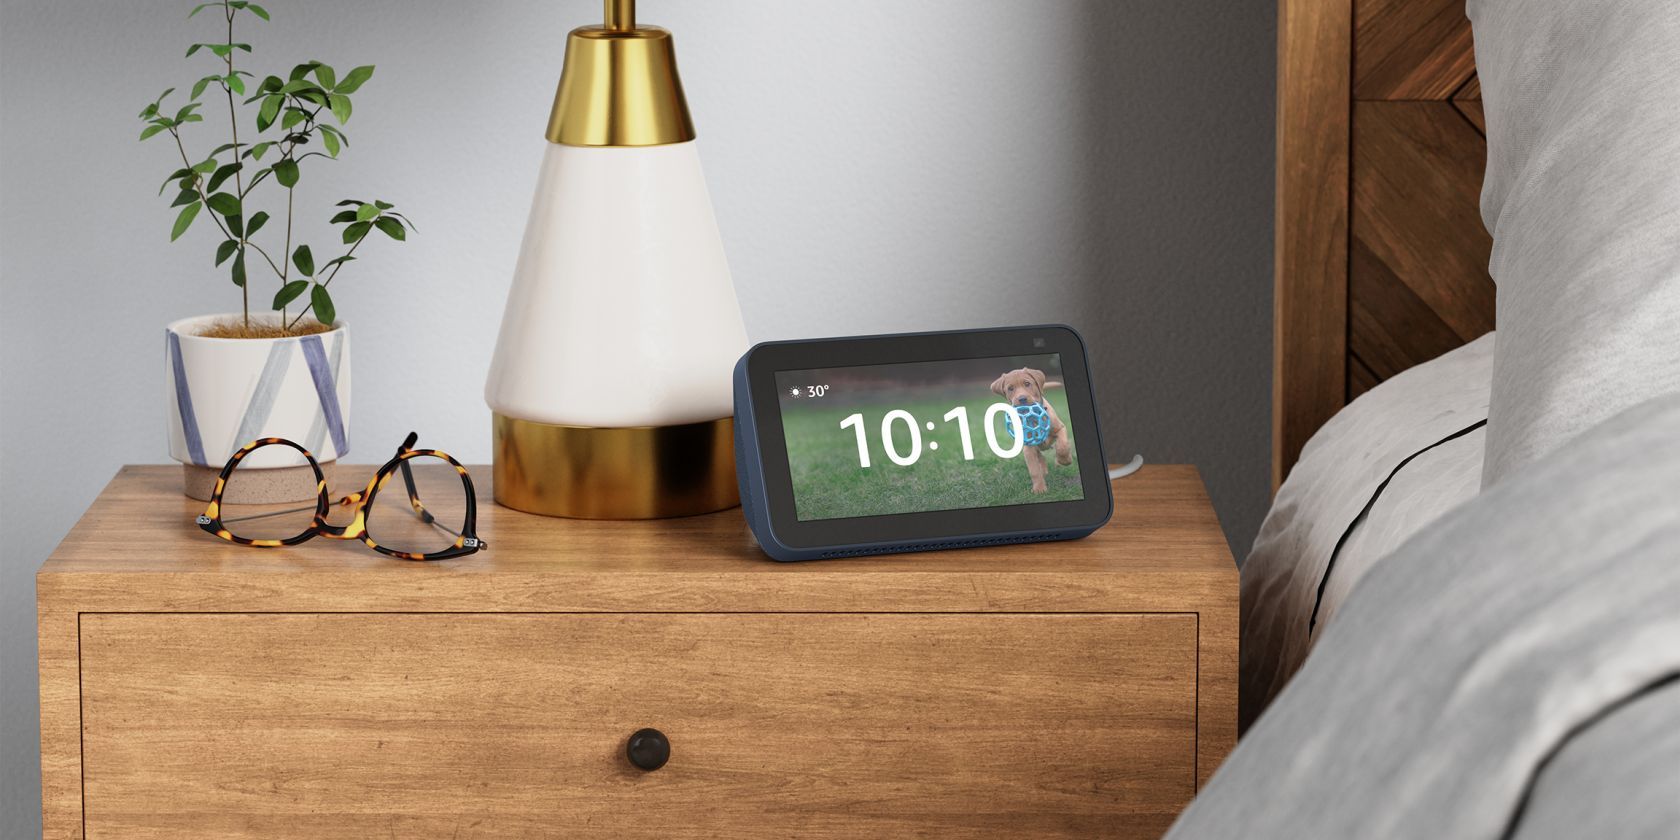 Amazon Prime Day Early Deal: Save $50 on Echo Show